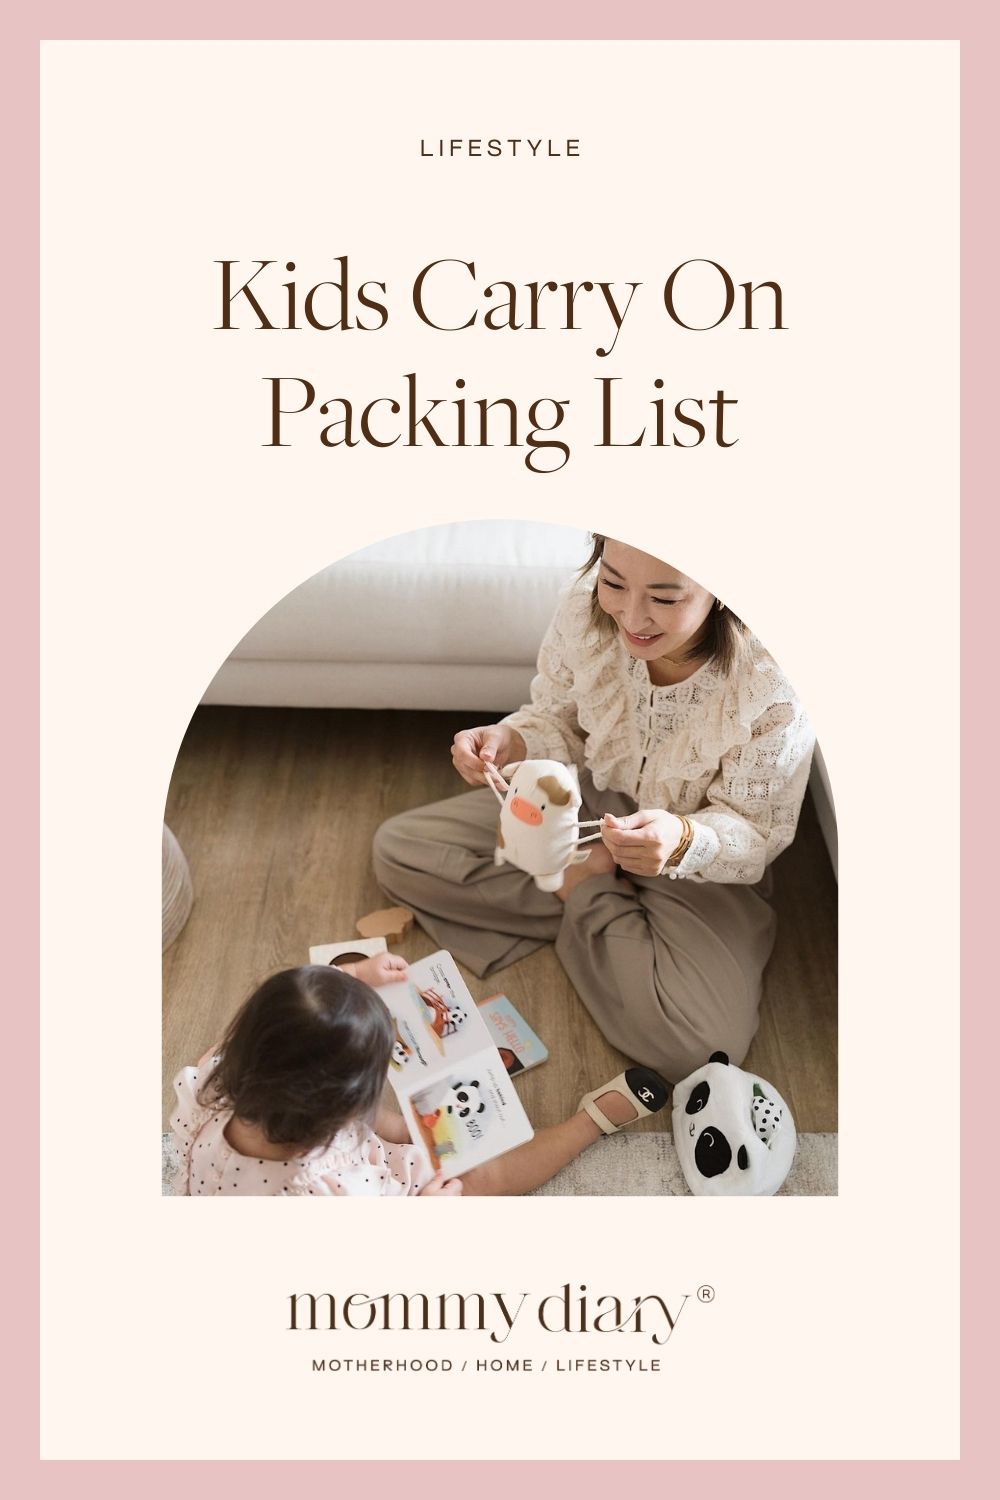 Kids Carry On Packing List